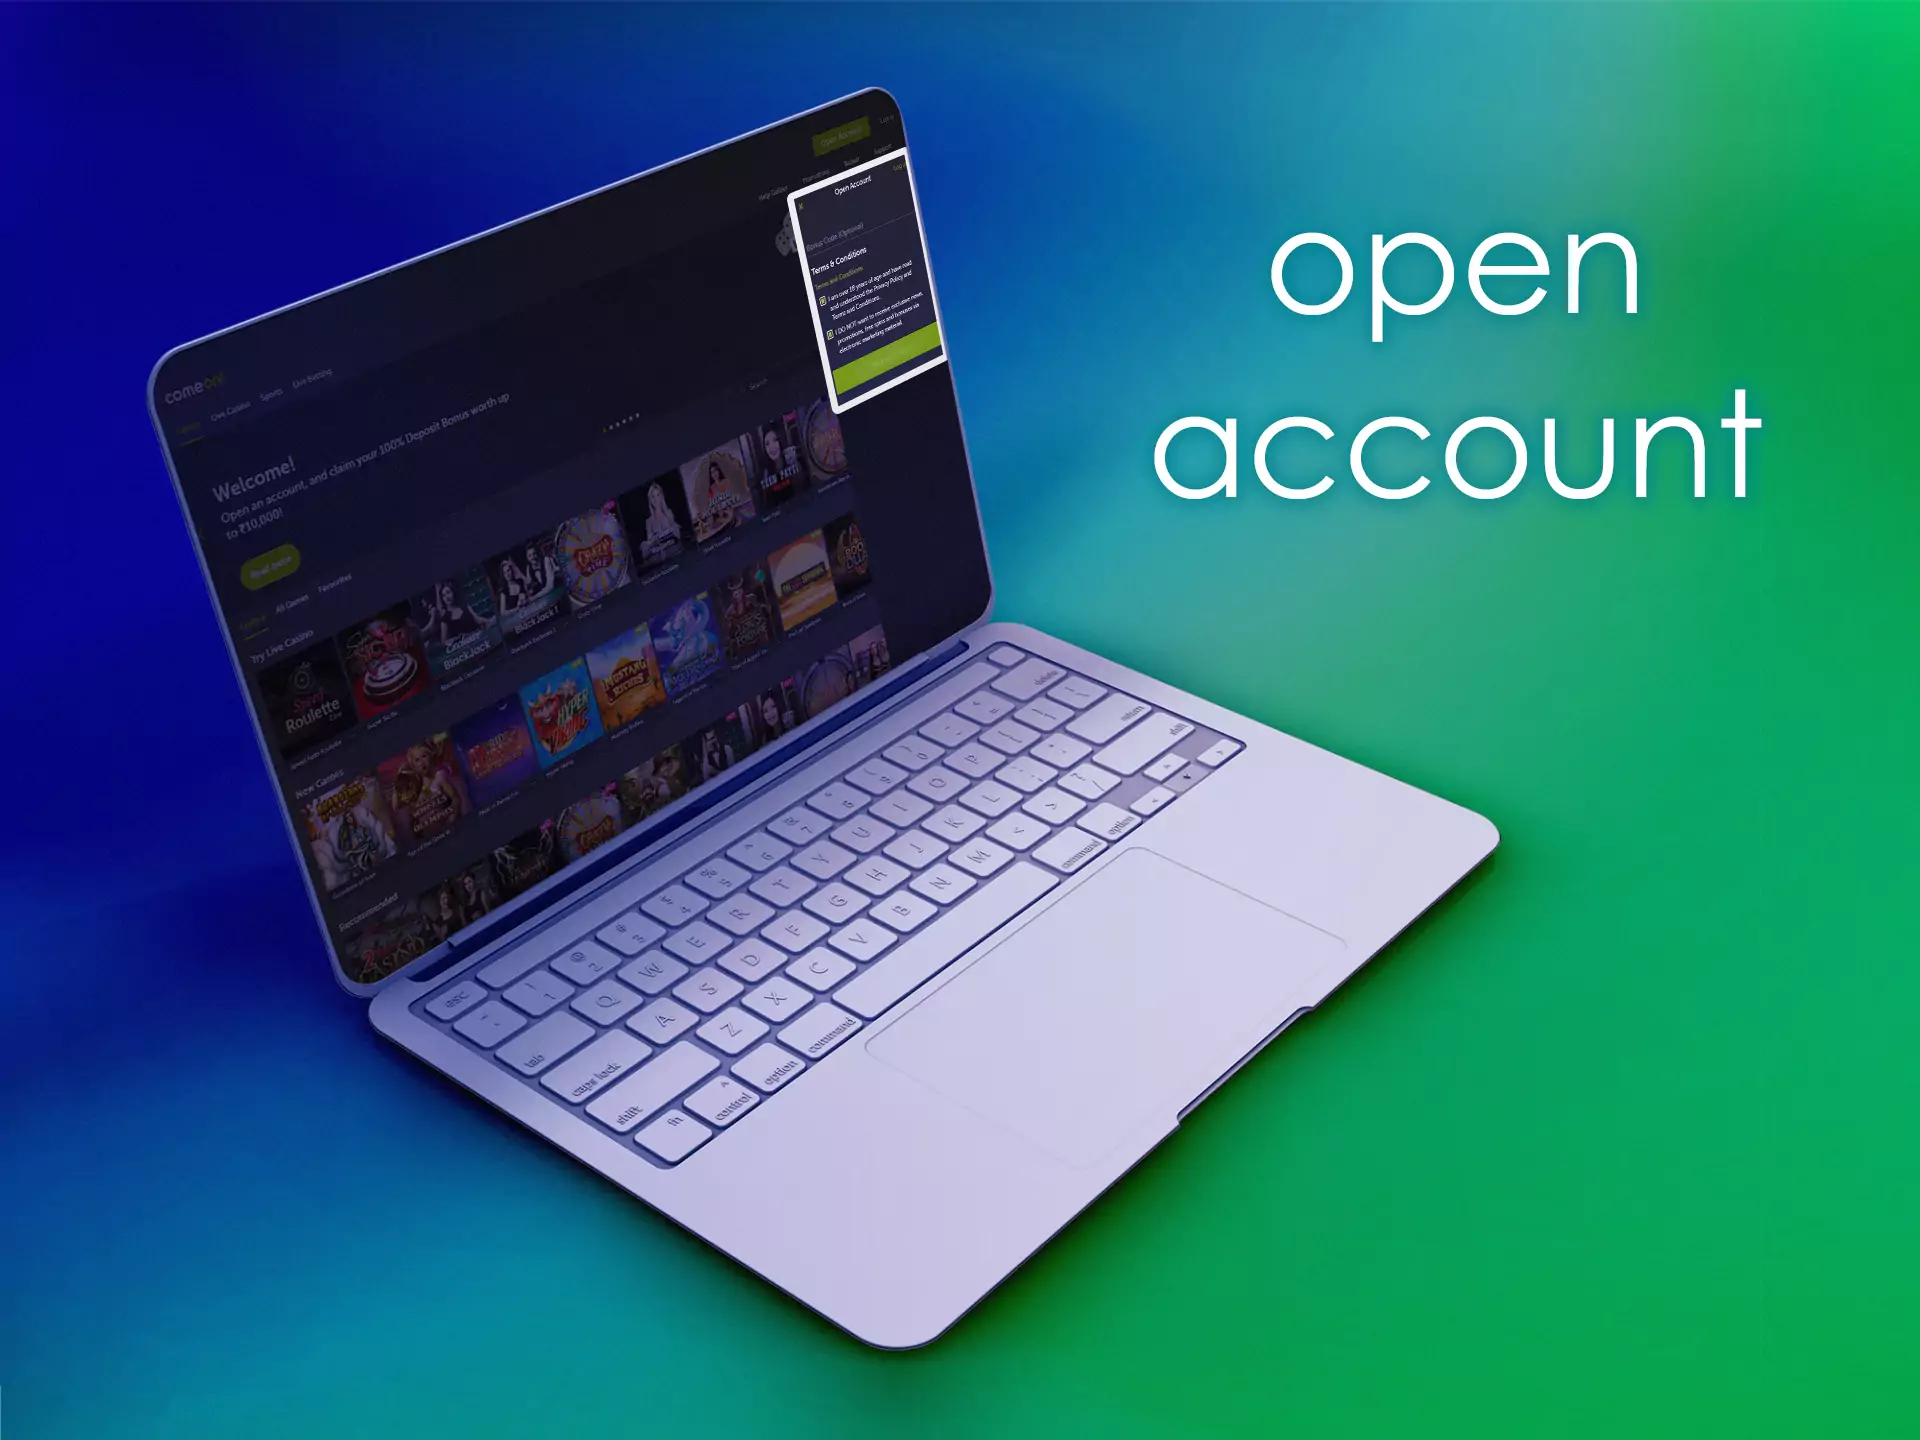 Confirm that you are agreed with the Terms and Conditions of the Comeon site and create a new account.